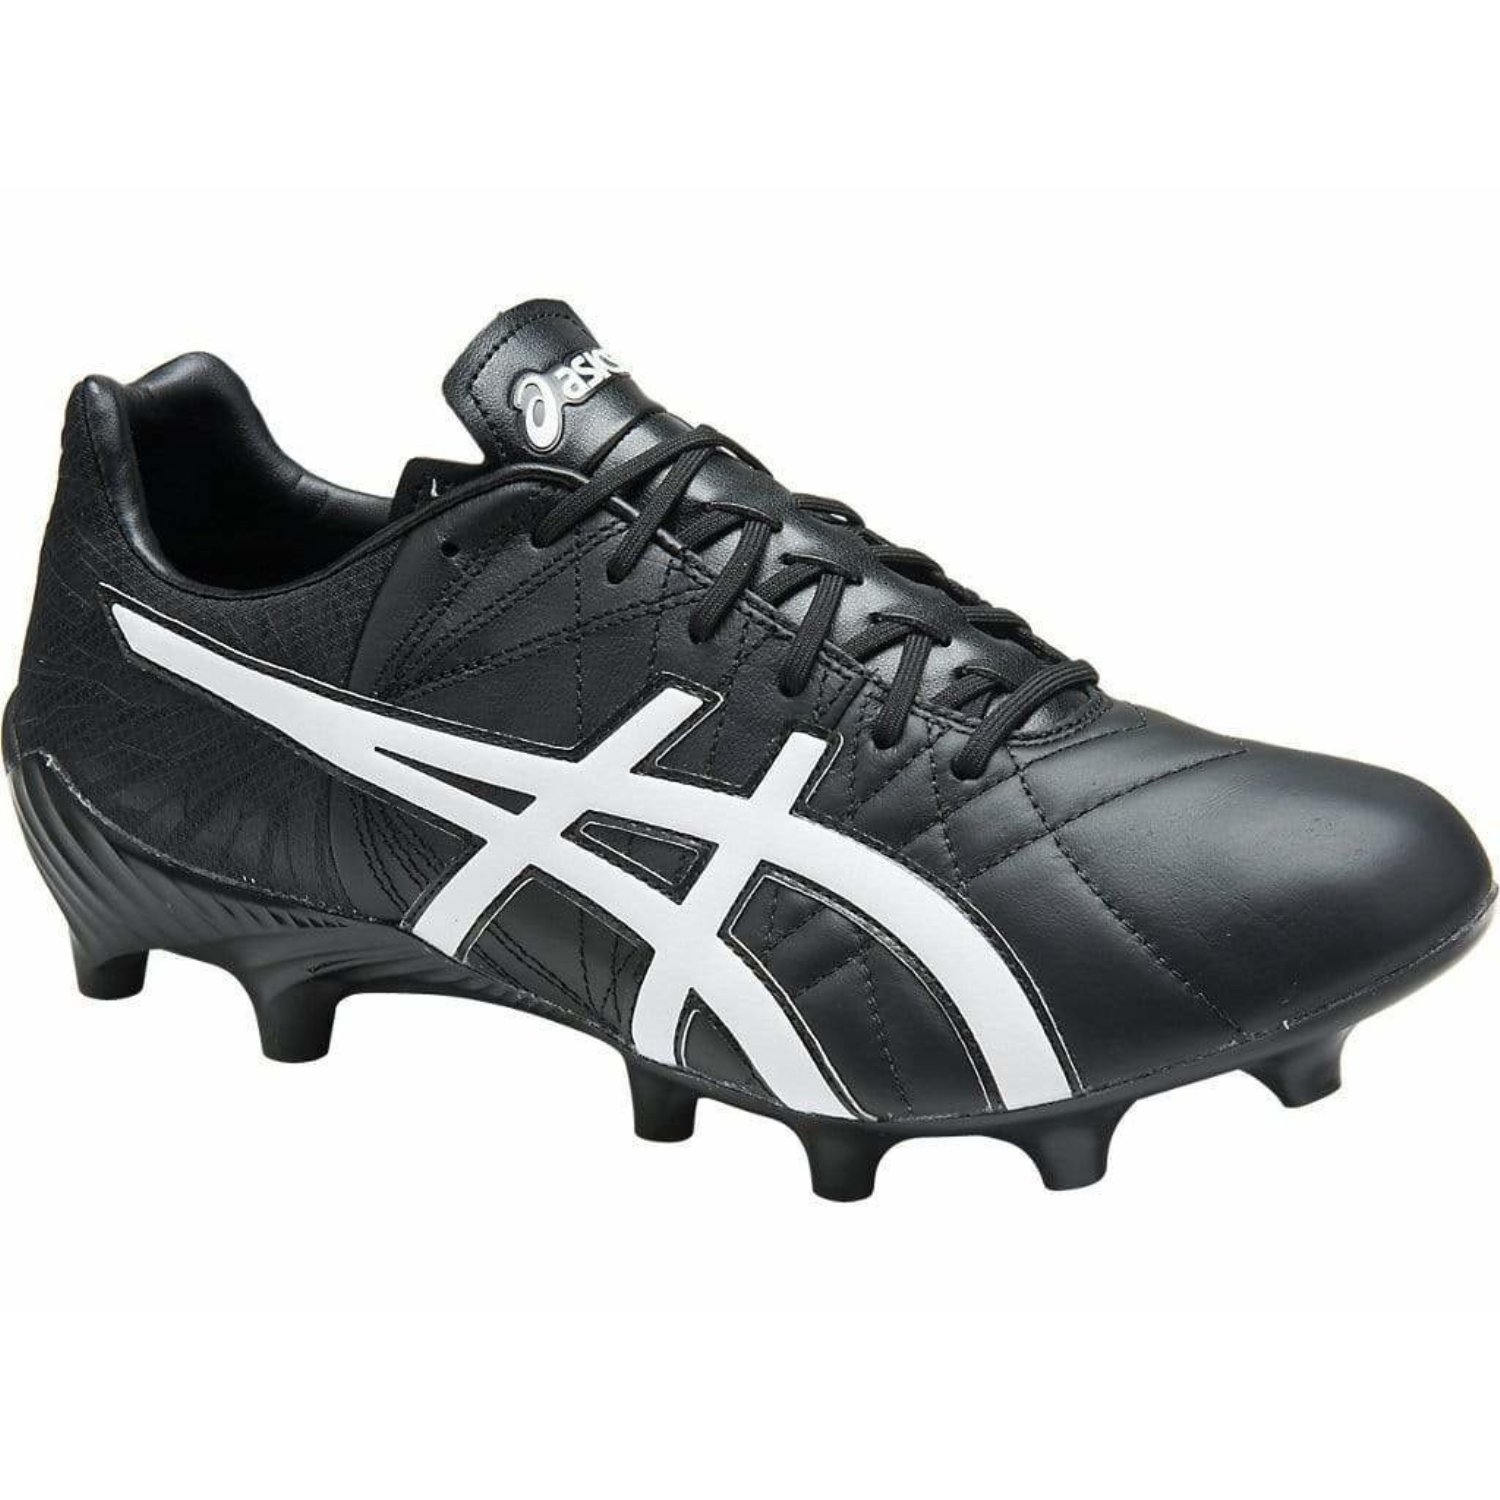 asic football boots